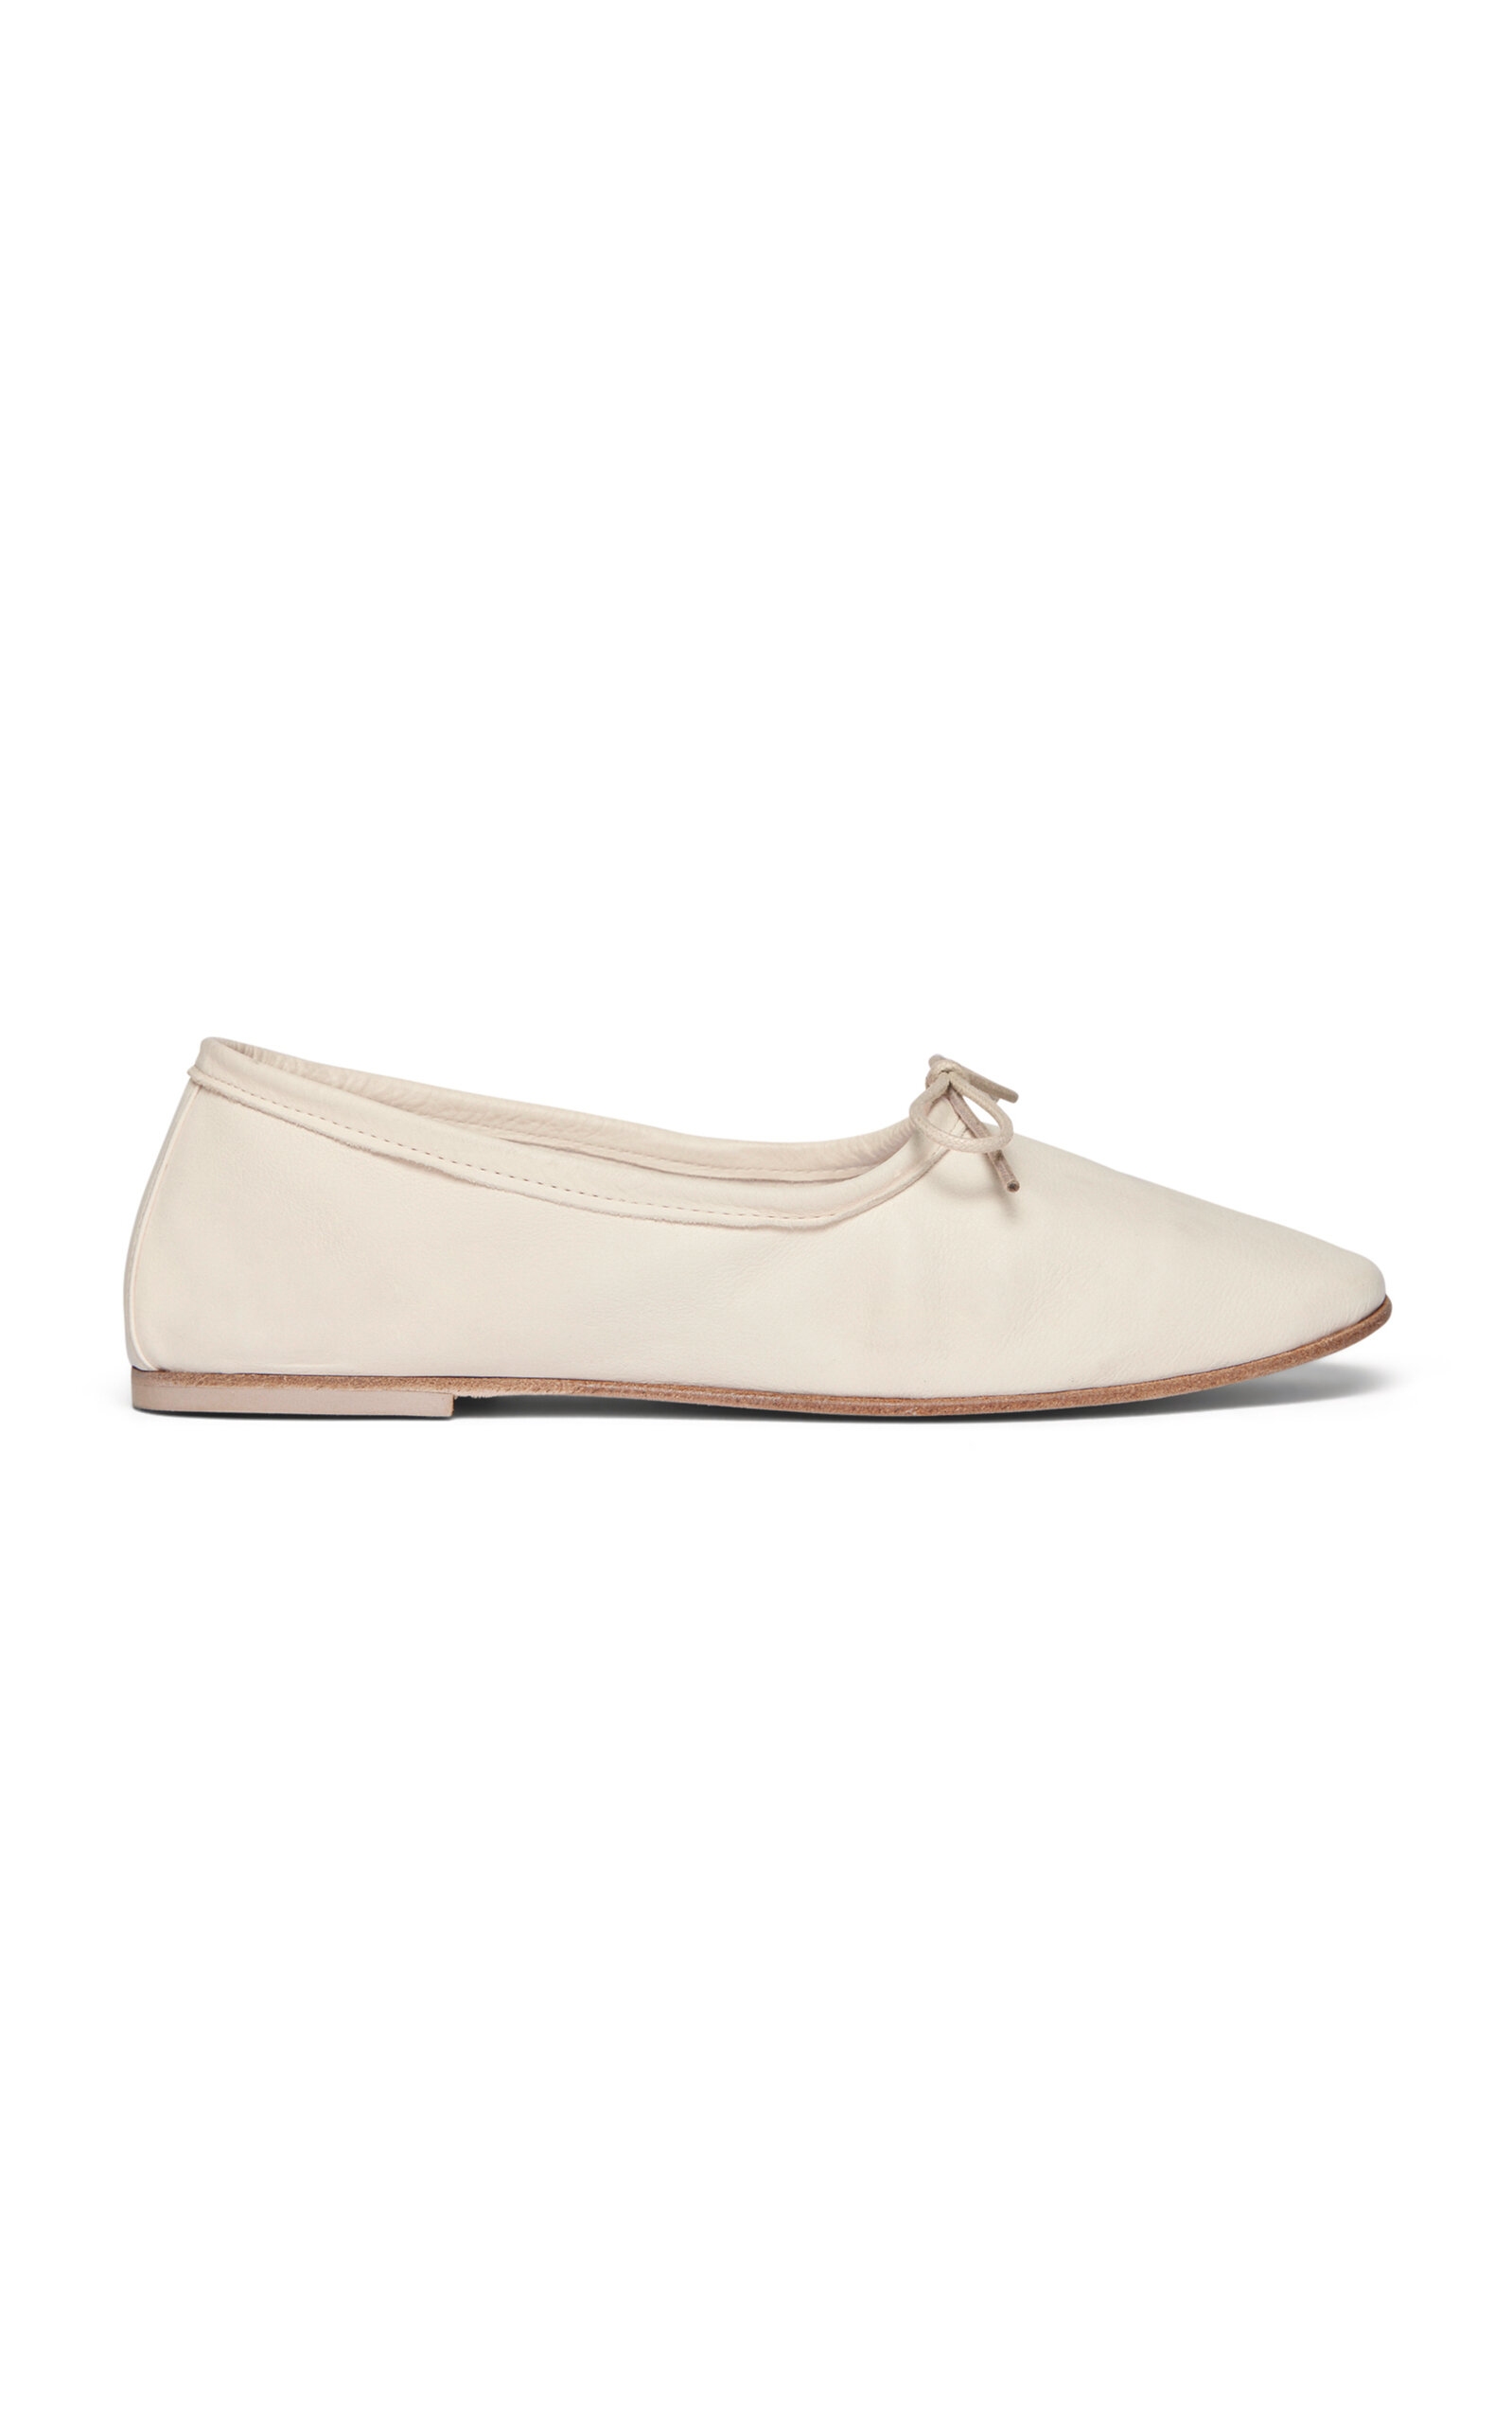 Freda Salvador Roma Leather Flats In Ivory